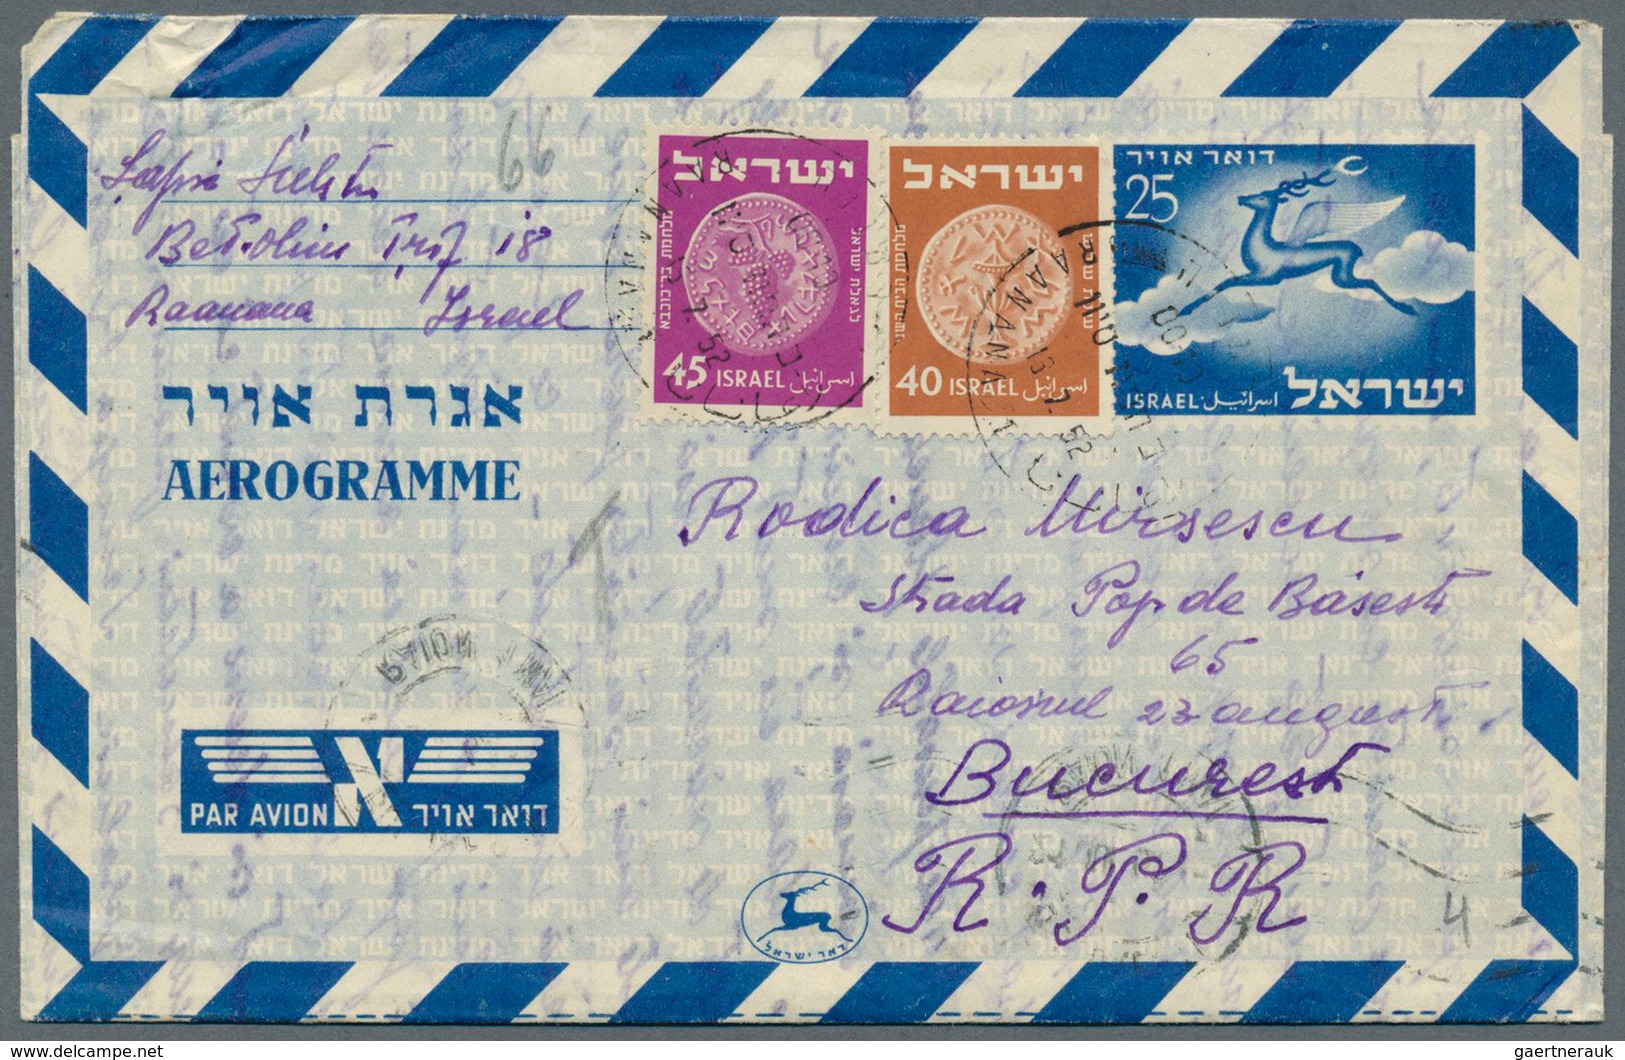 Israel: 1951/1990 (ca.), AEROGRAMMES: accumulation with about 650 commercially used aerogrammes with